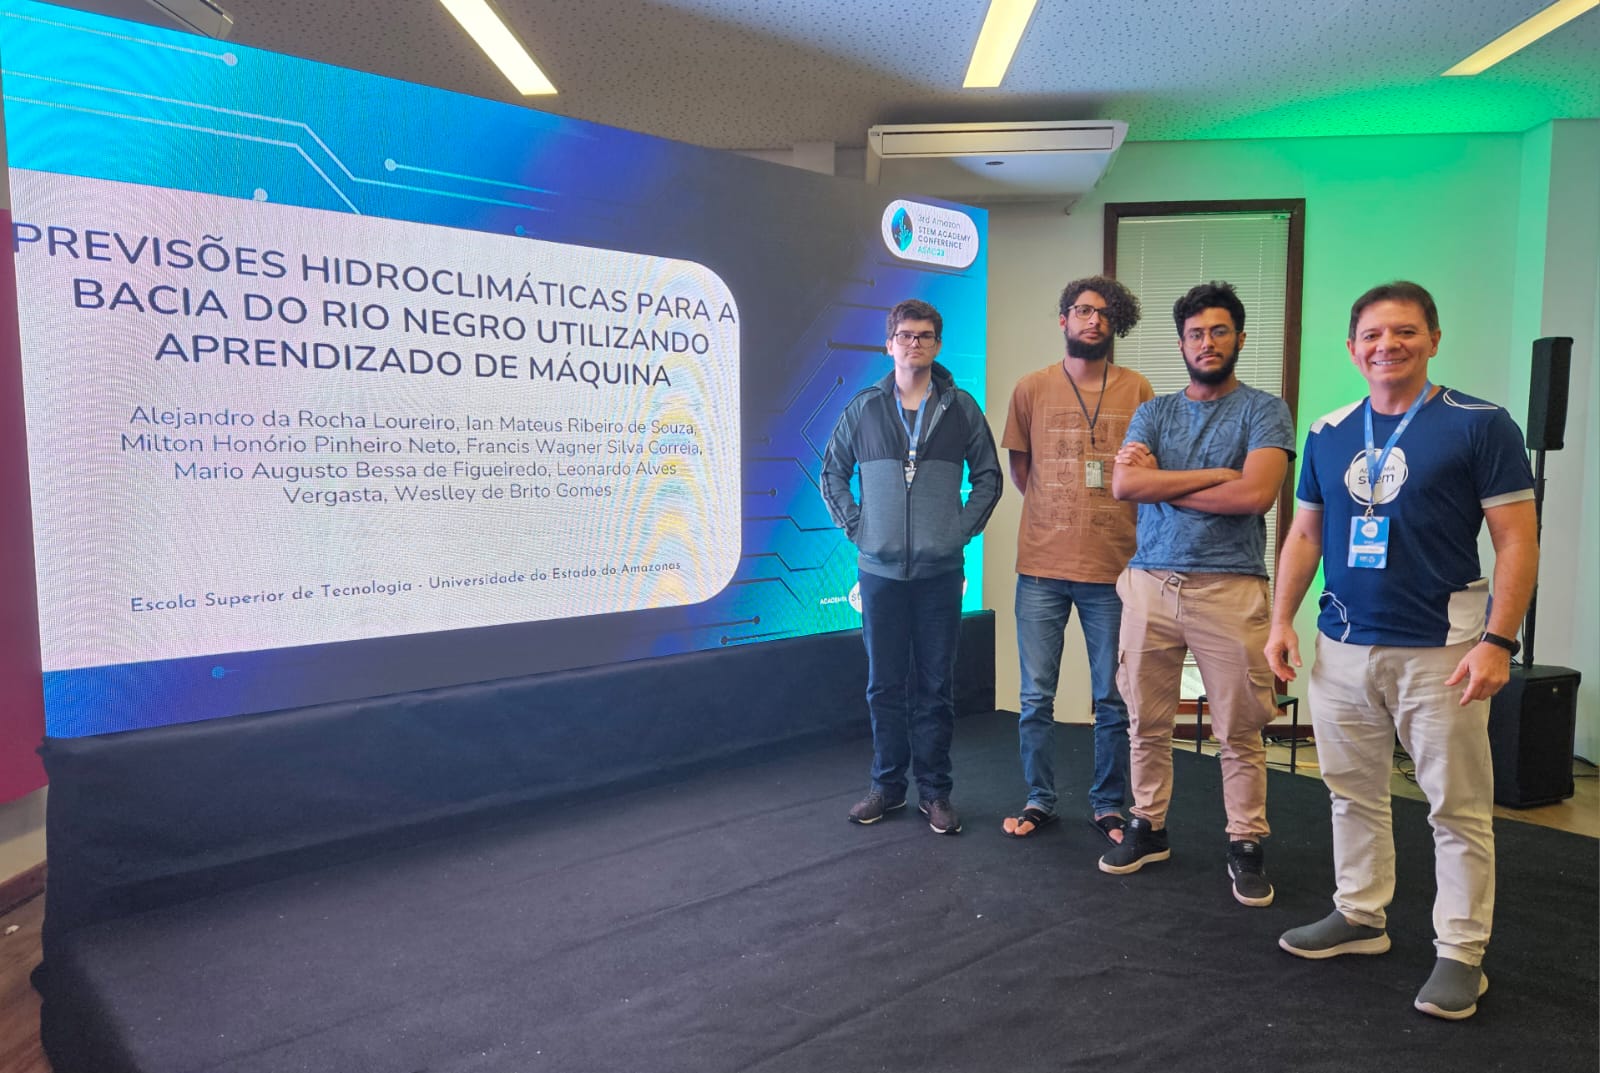 UEA develops Artificial Intelligence to monitor climate events in Rio Negro